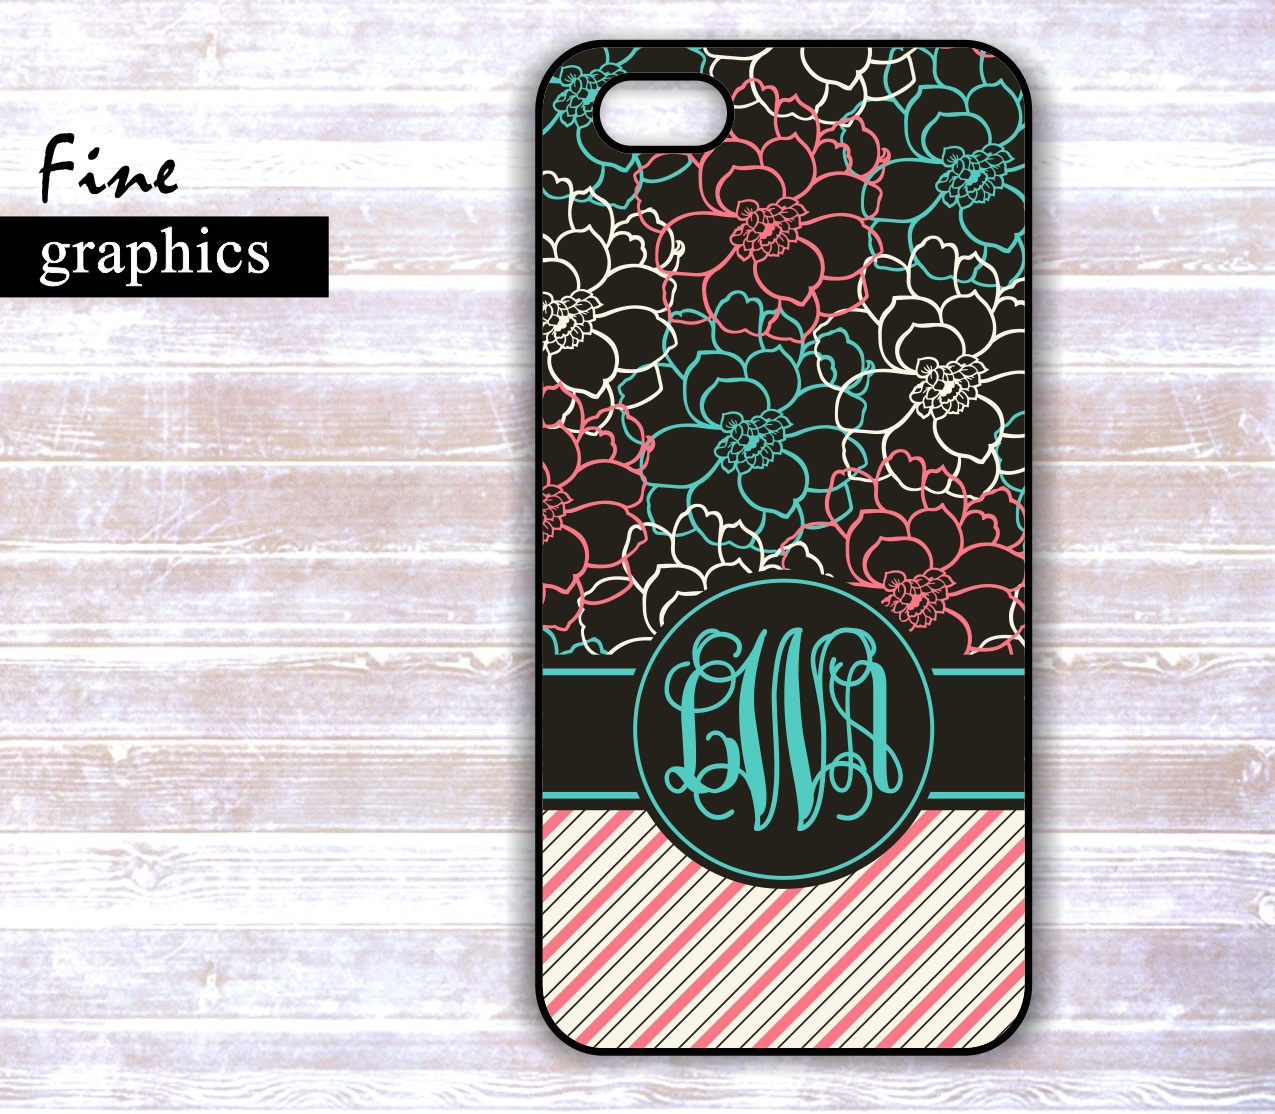 Iphone 5 case - Iphone 4/4S case - Samsung Galaxy S3 case -Floral Damask Pink Stripes Monogram Personalized iphone Hard Cover